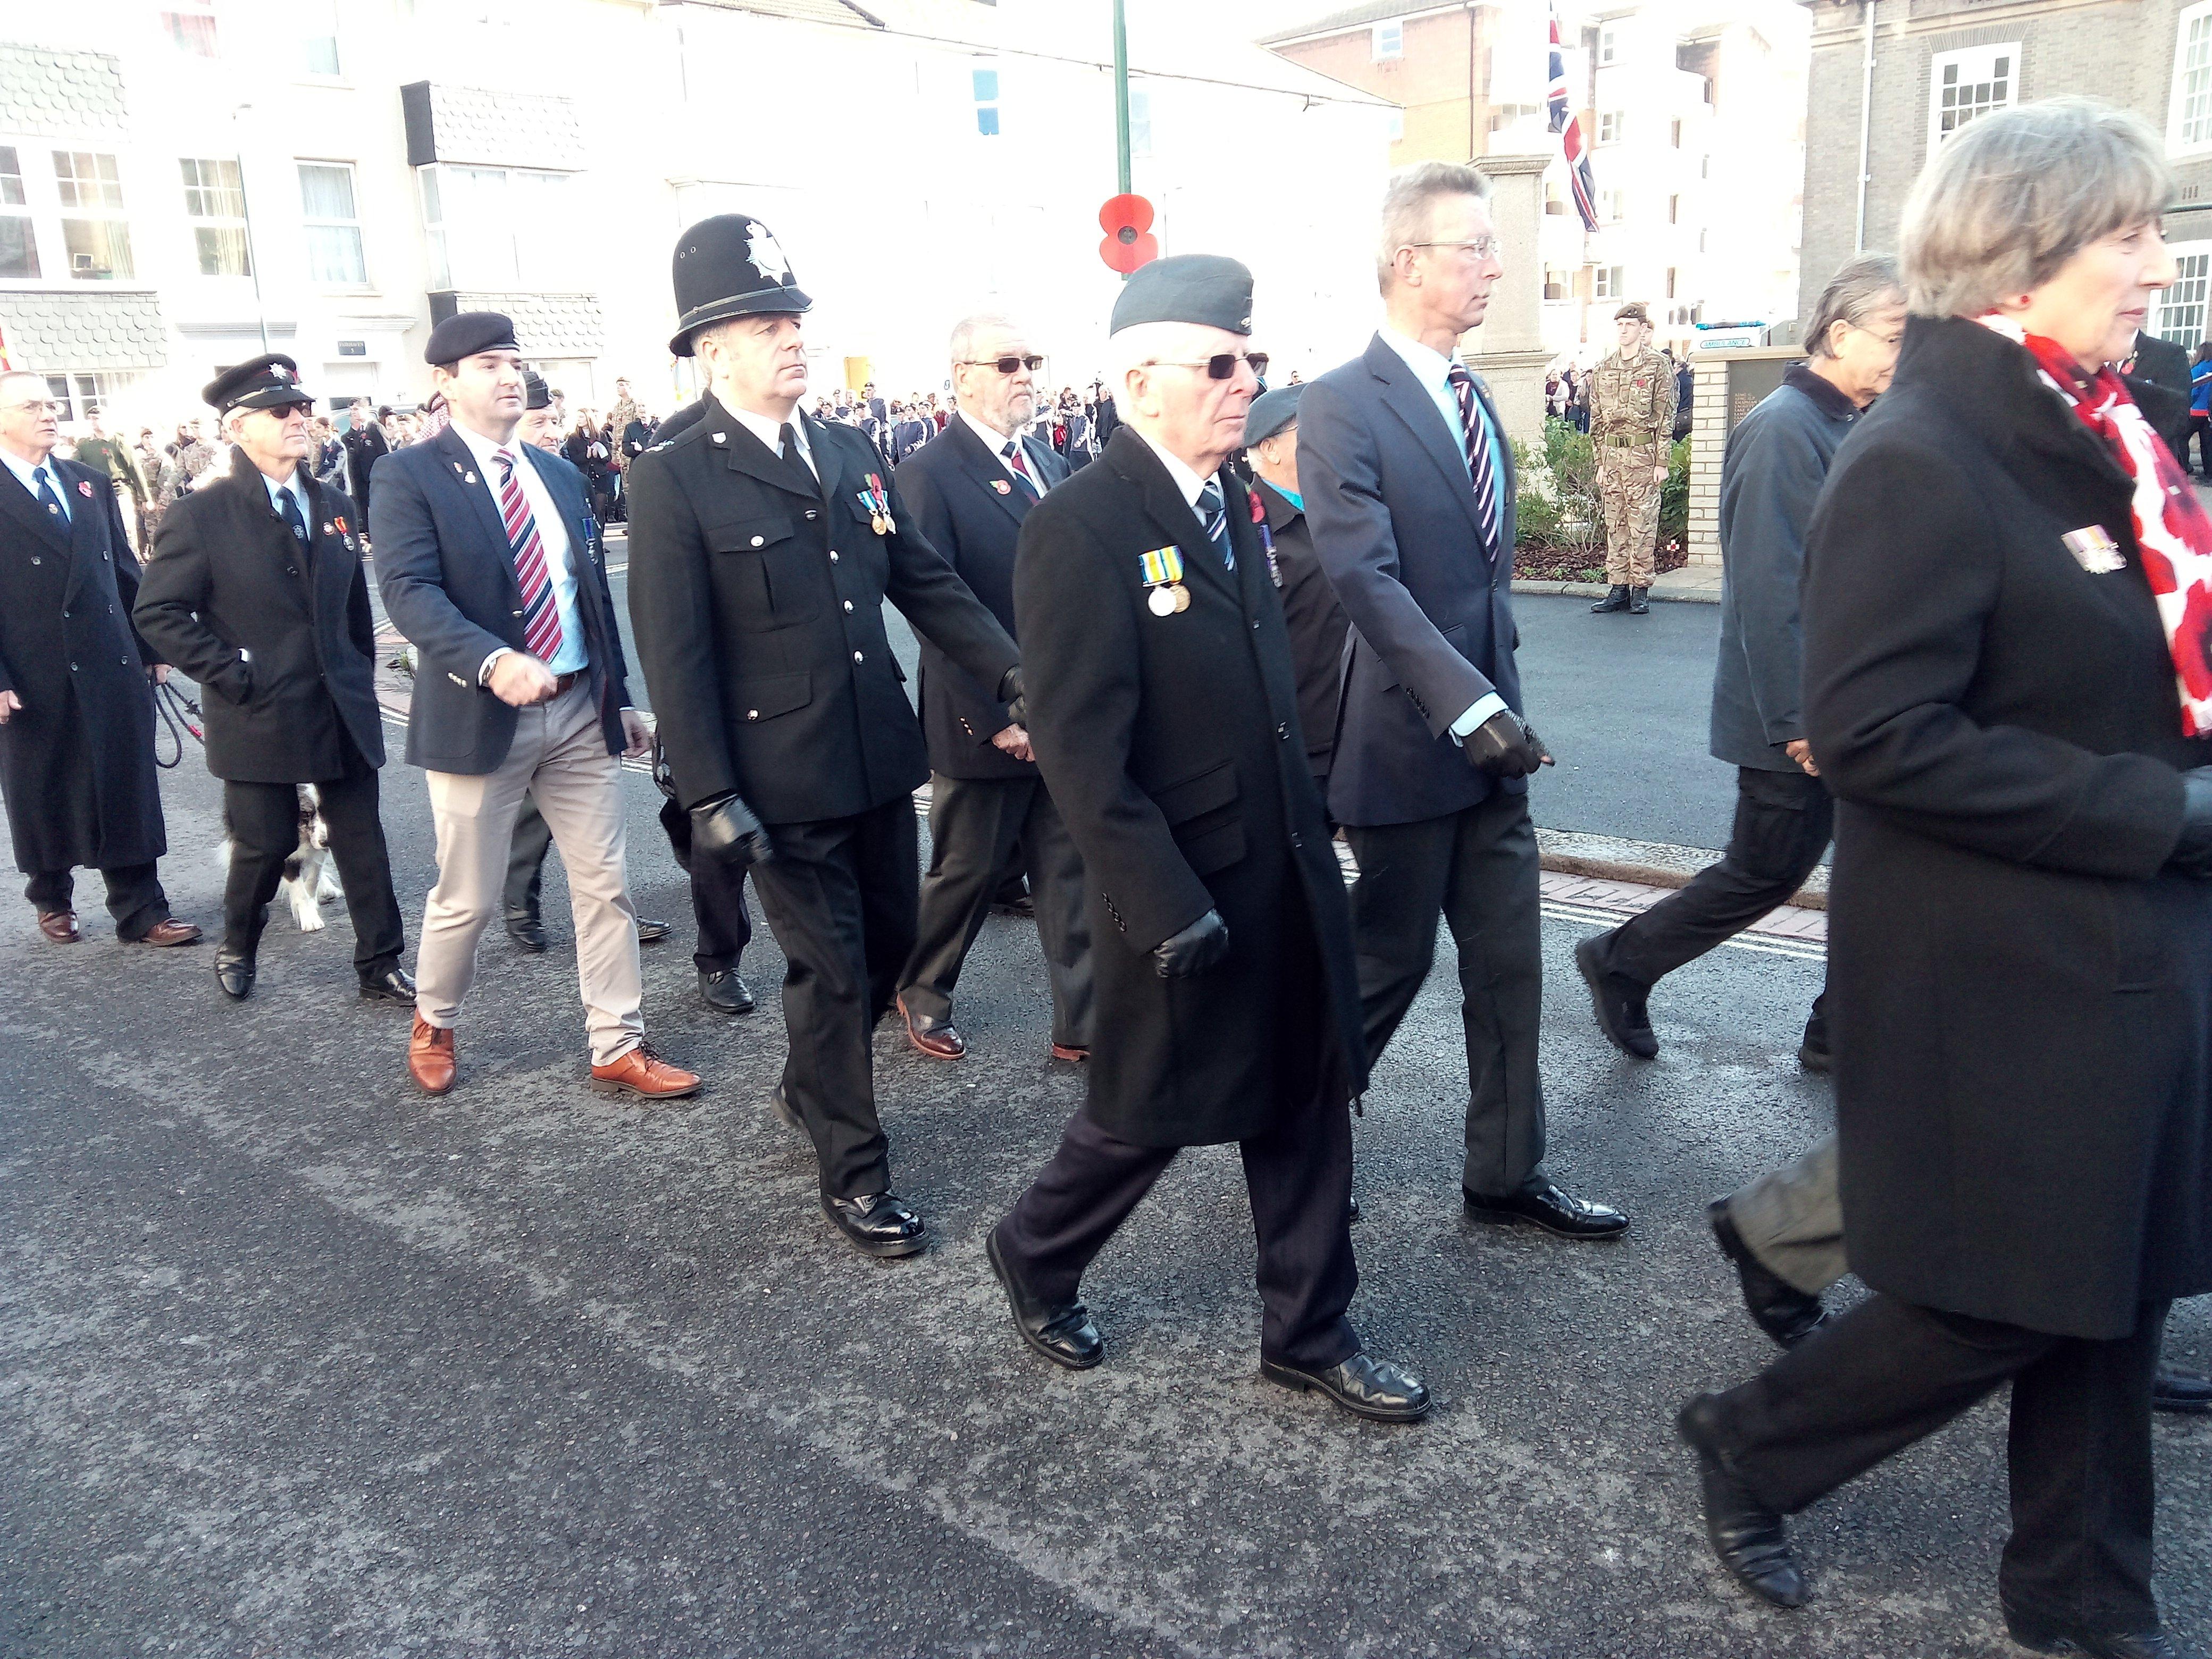 Veterans also took part in the parade